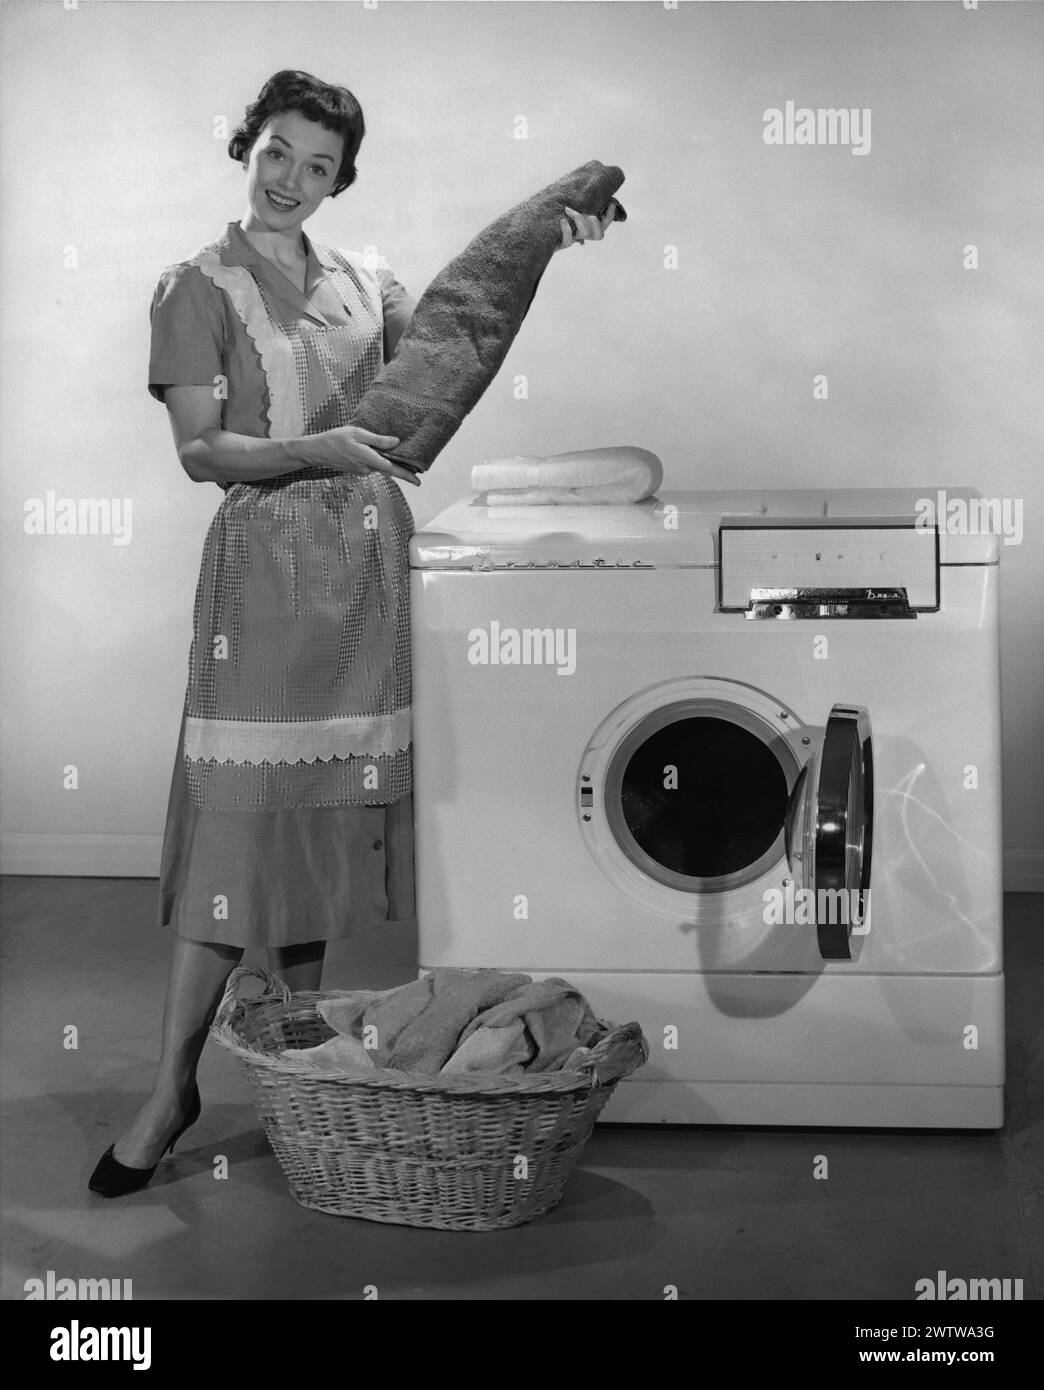 Young woman in a dress and a house apron as well as high heels, standing in front of her electric dryer with a basket of clothes on the floor holding a folded towel and smiling at the camera Stock Photo